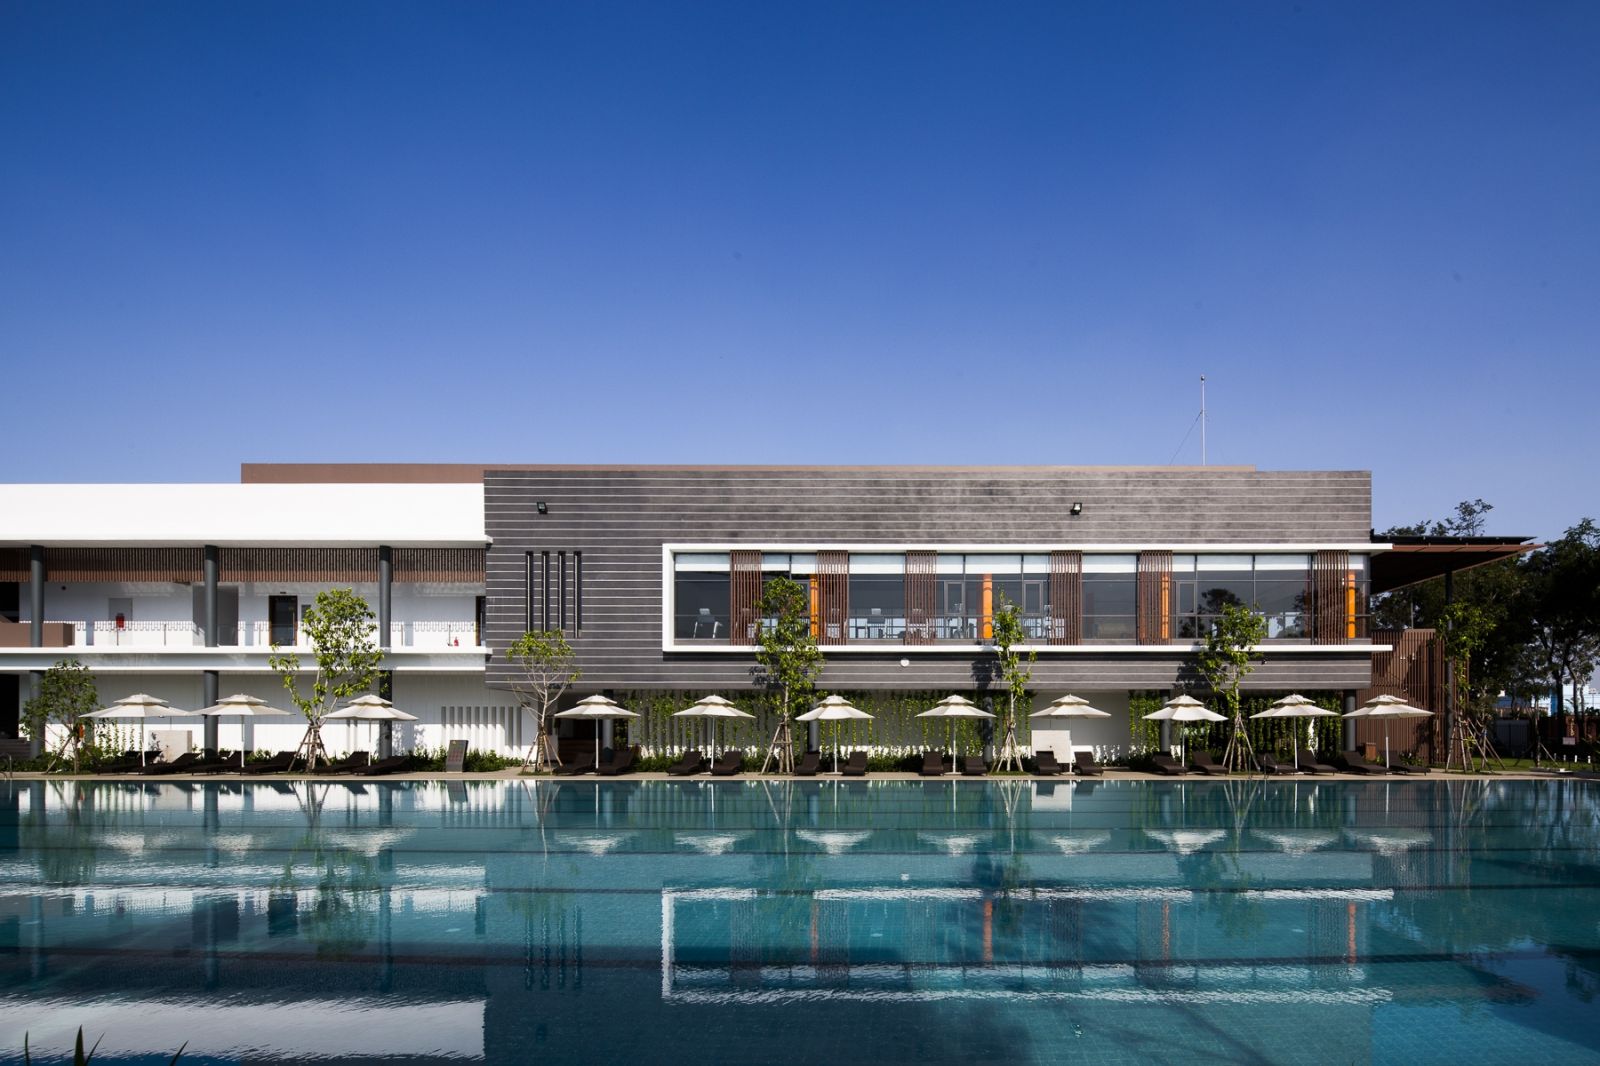 Olympic-standard swimming pool at Celadon Sports and Resort Club.